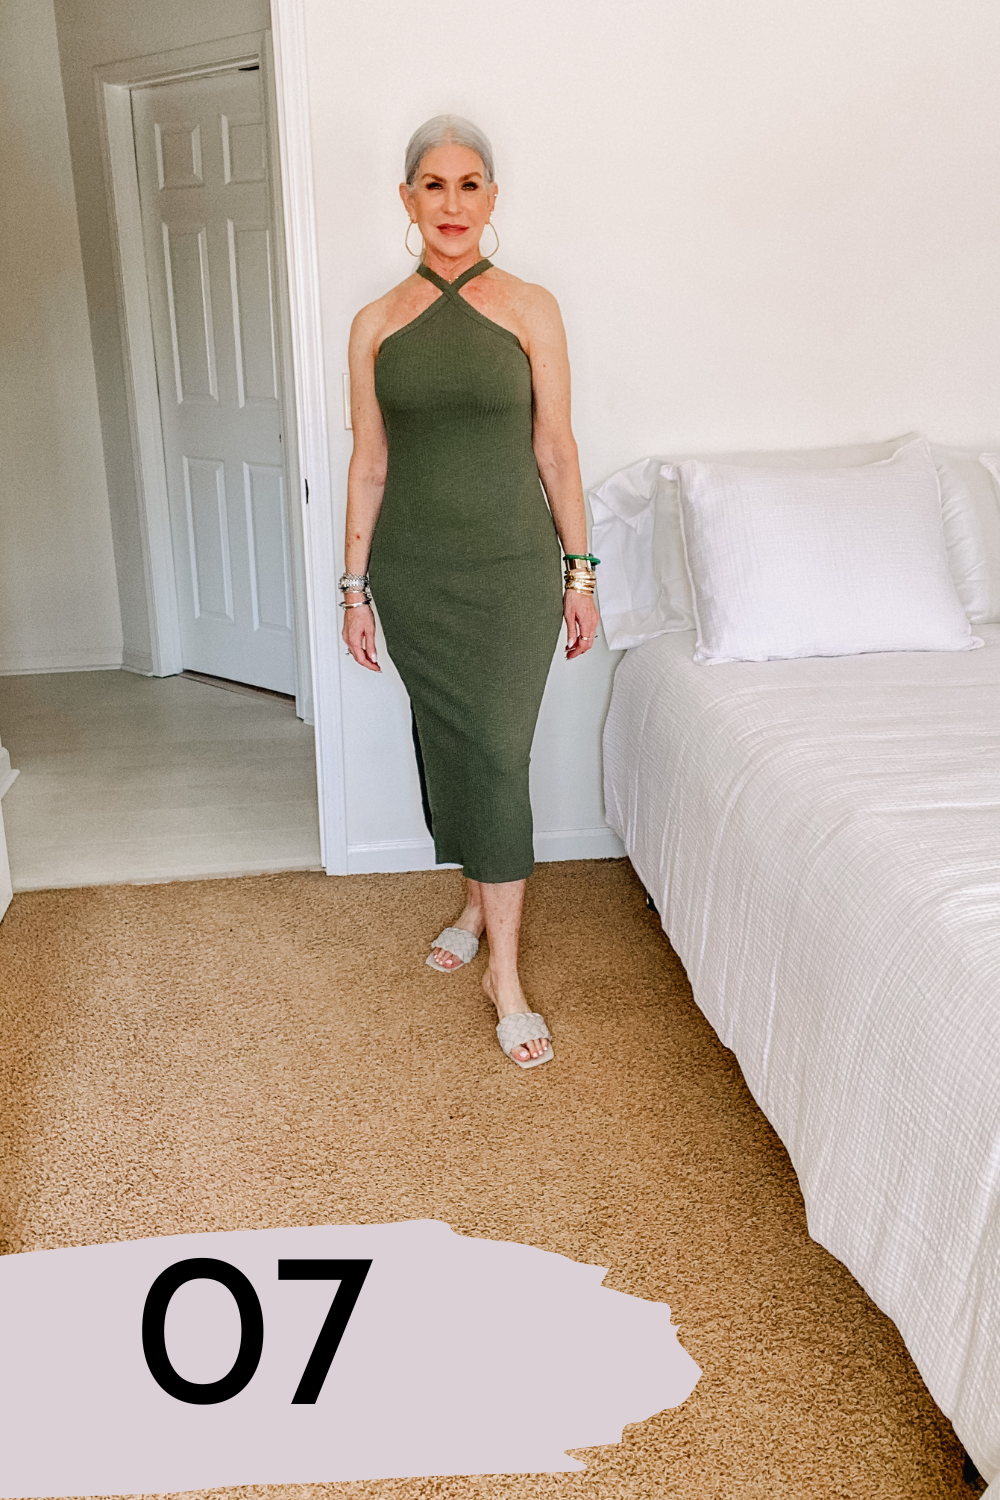 silver hair lady wearing fitted olive green dress